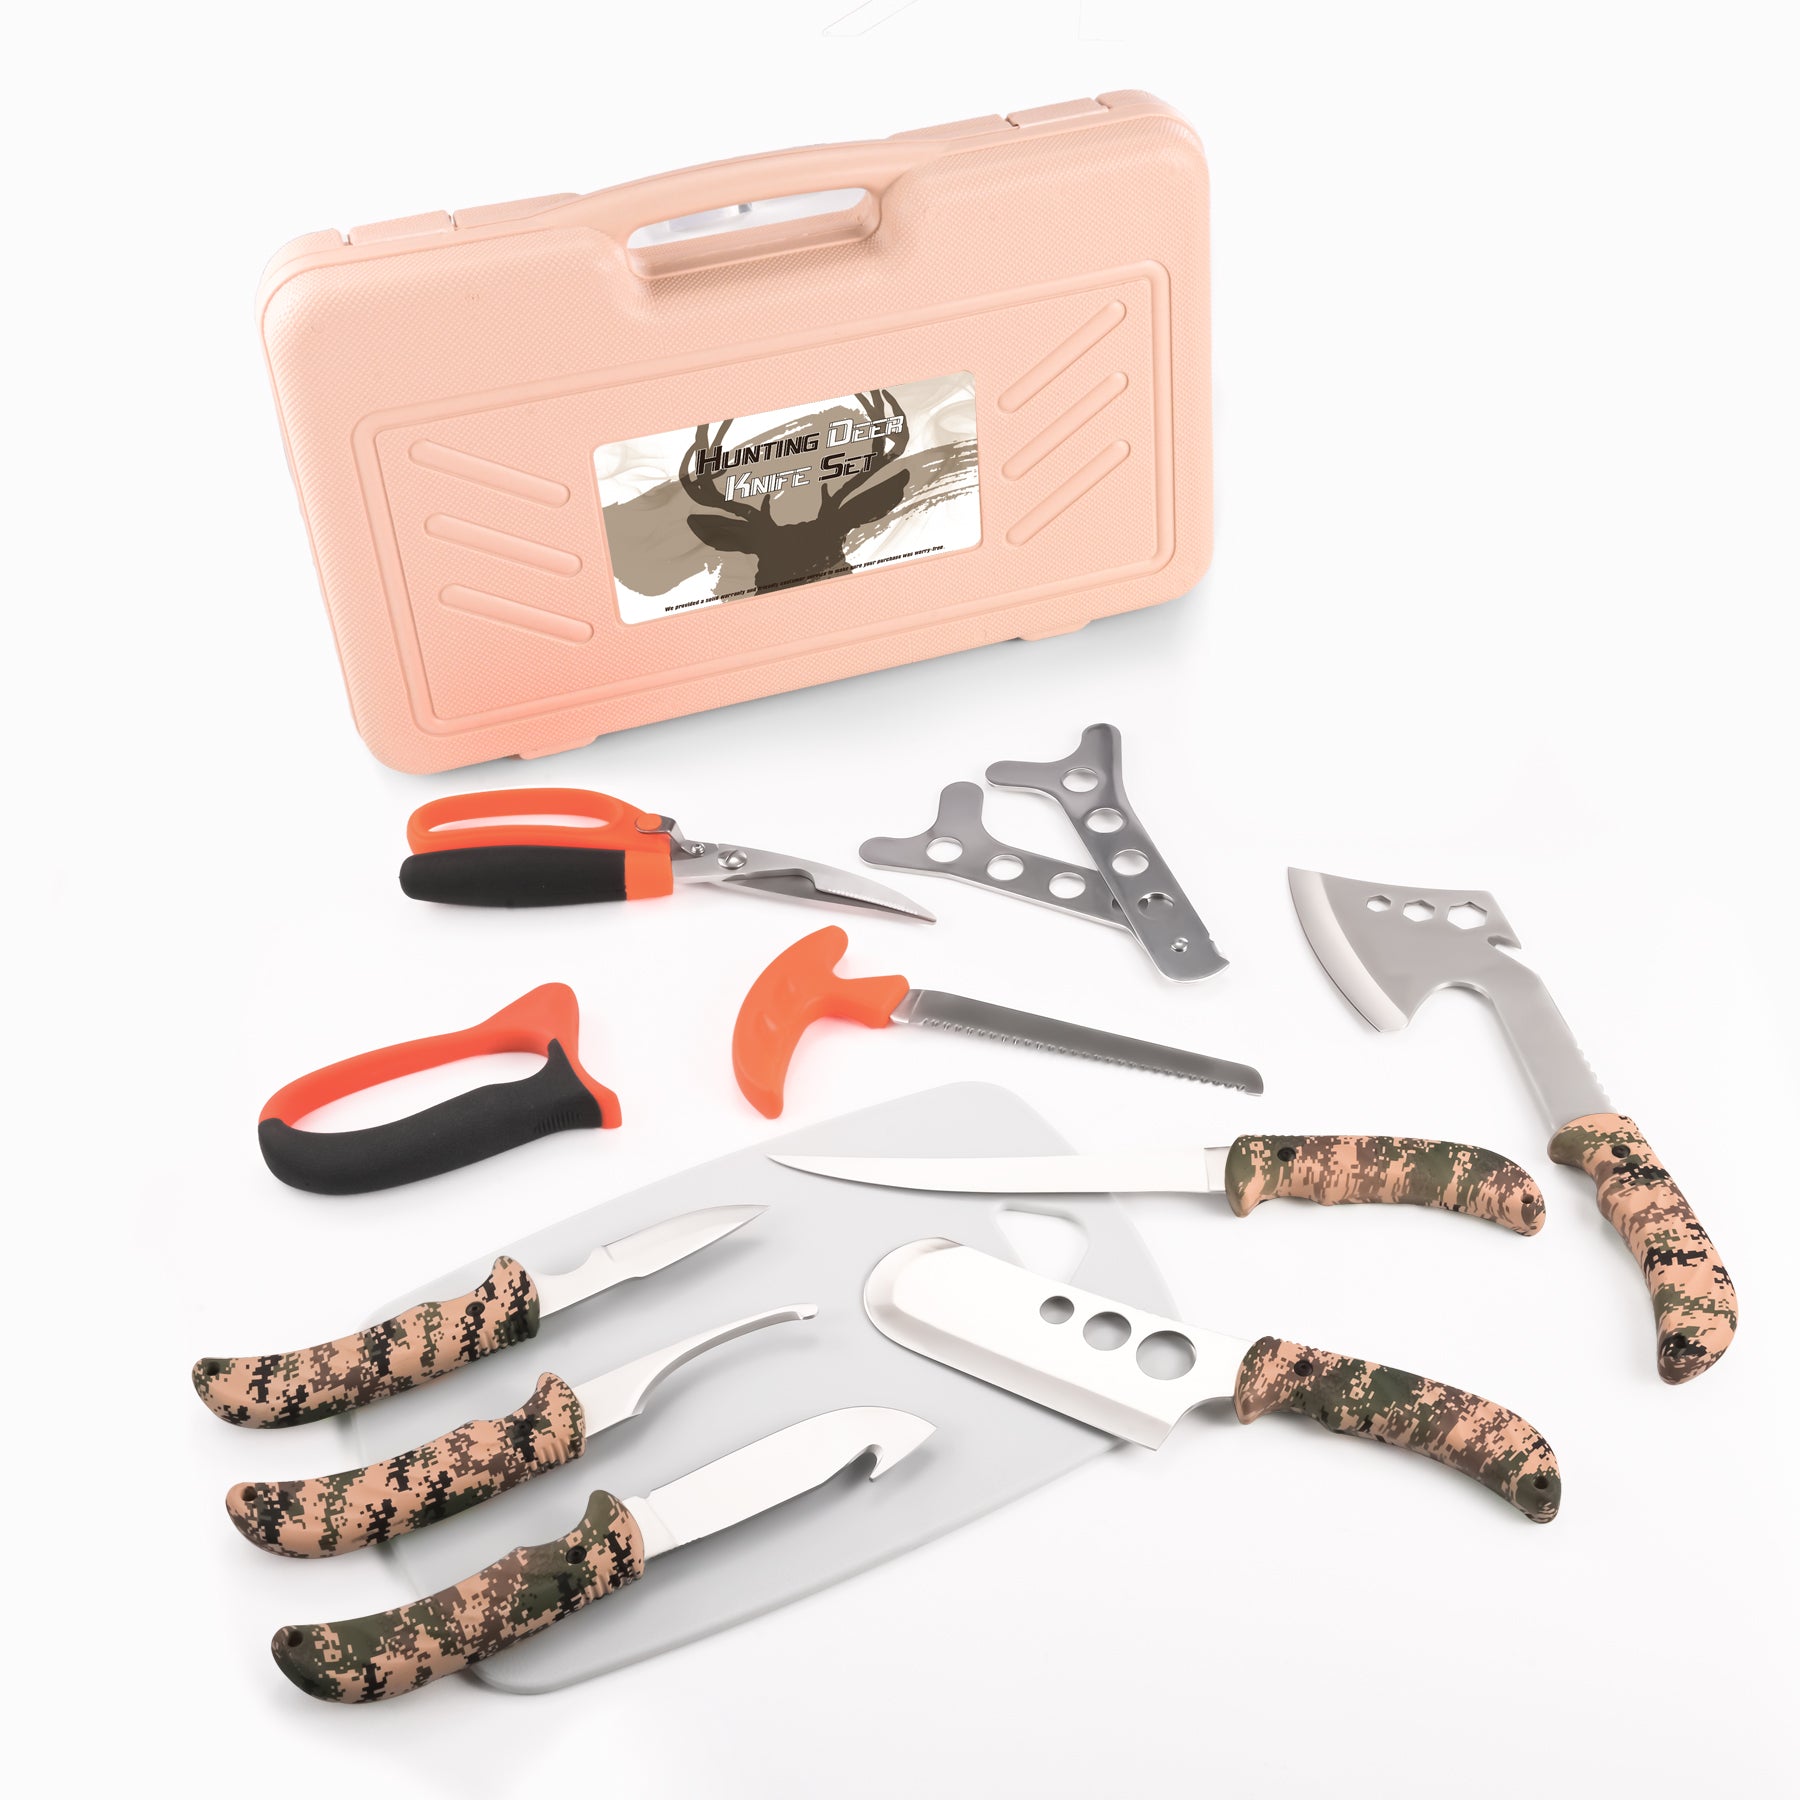  KNINE OUTDOORS Hunting Deer Knife Set Field Dressing Kit  Portable Butcher Game Processor Set, 12 Pieces : Sports & Outdoors